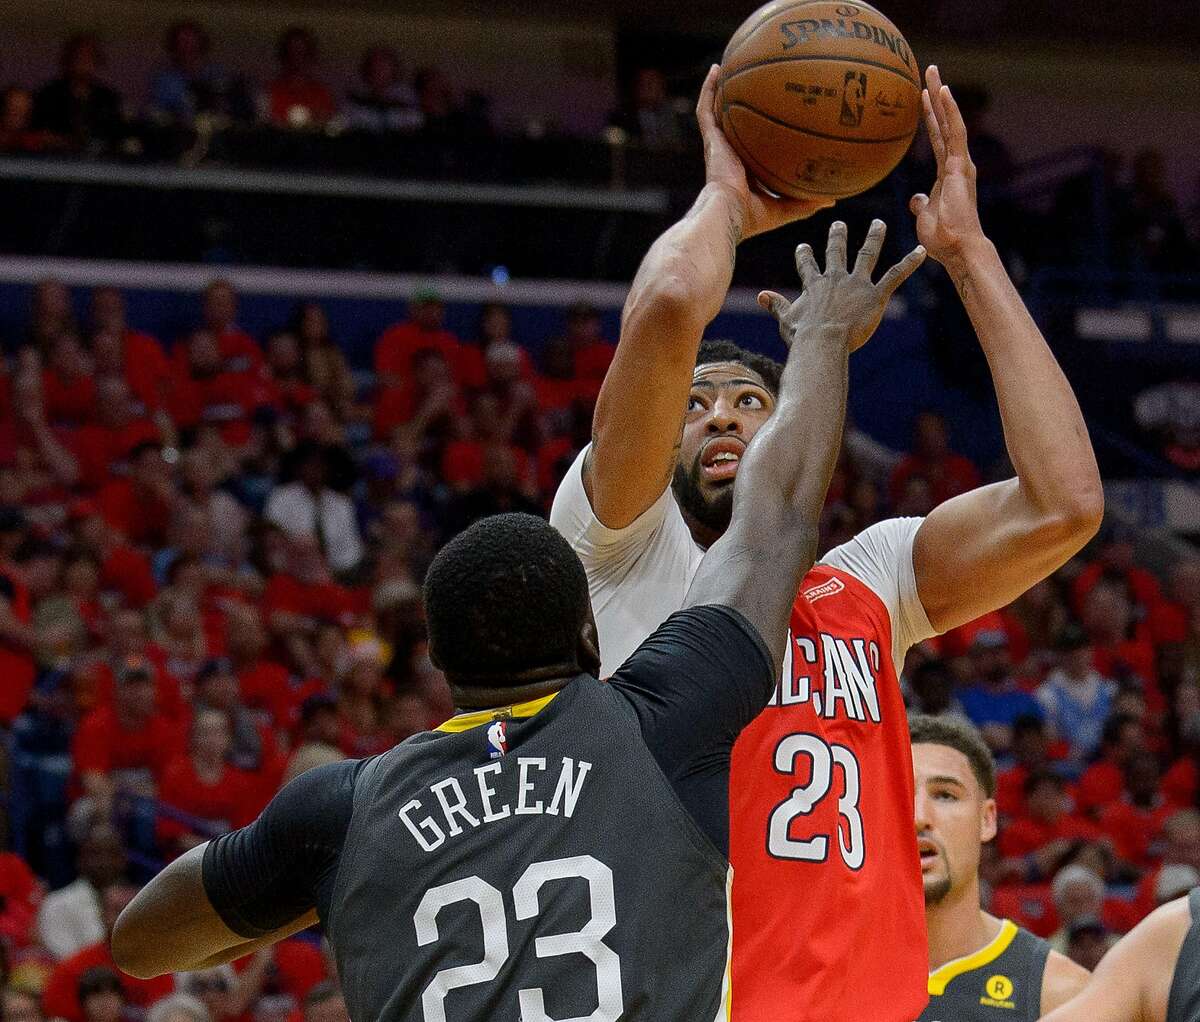 New Orleans Pelicans forward Anthony Davis (23) shoots against Golden State Warriors forward Draymond Green (23) during the first half of game 4 of the conference semifinal NBA playoffs at the Smoothie King Center in New Orleans, La. Sunday, May 6, 2018.